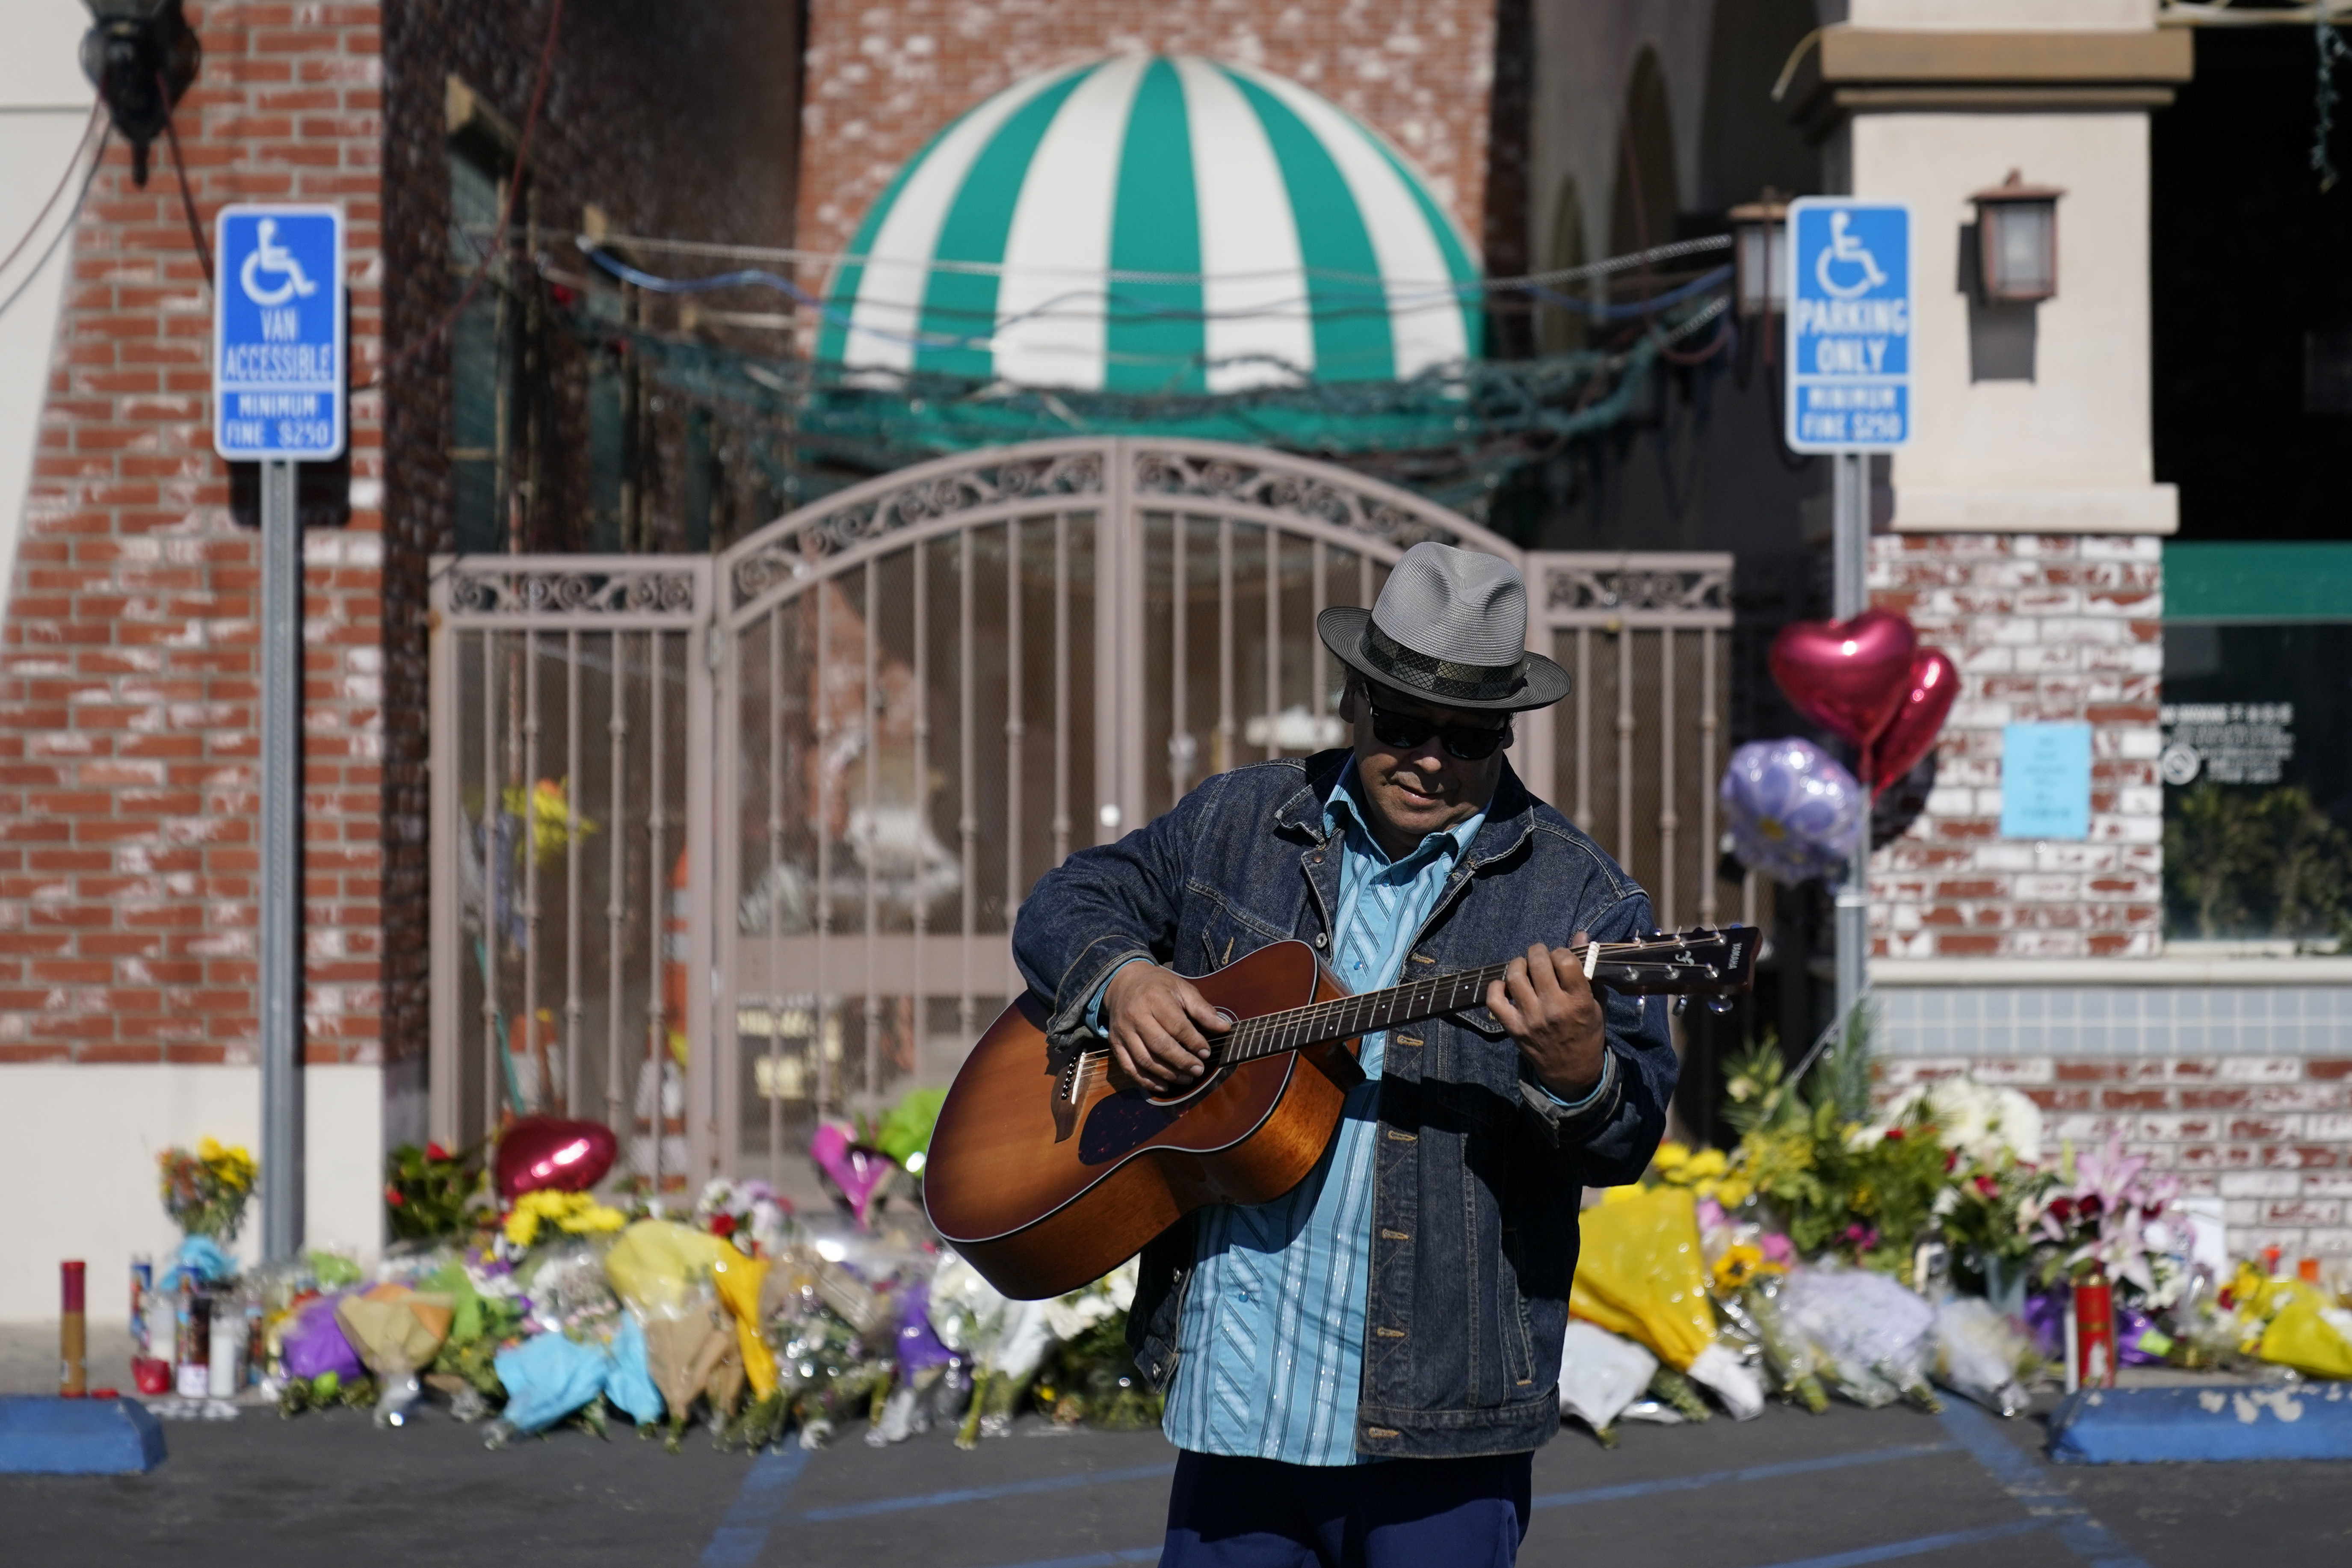 Gabriel Alexander plays guitar and sings in front of an impromptu offering outside the Star Ballroom Dance Studio, Tuesday, January 24, 2023, in Monterey Park, California.  (AP Photo/Ashley Landis)